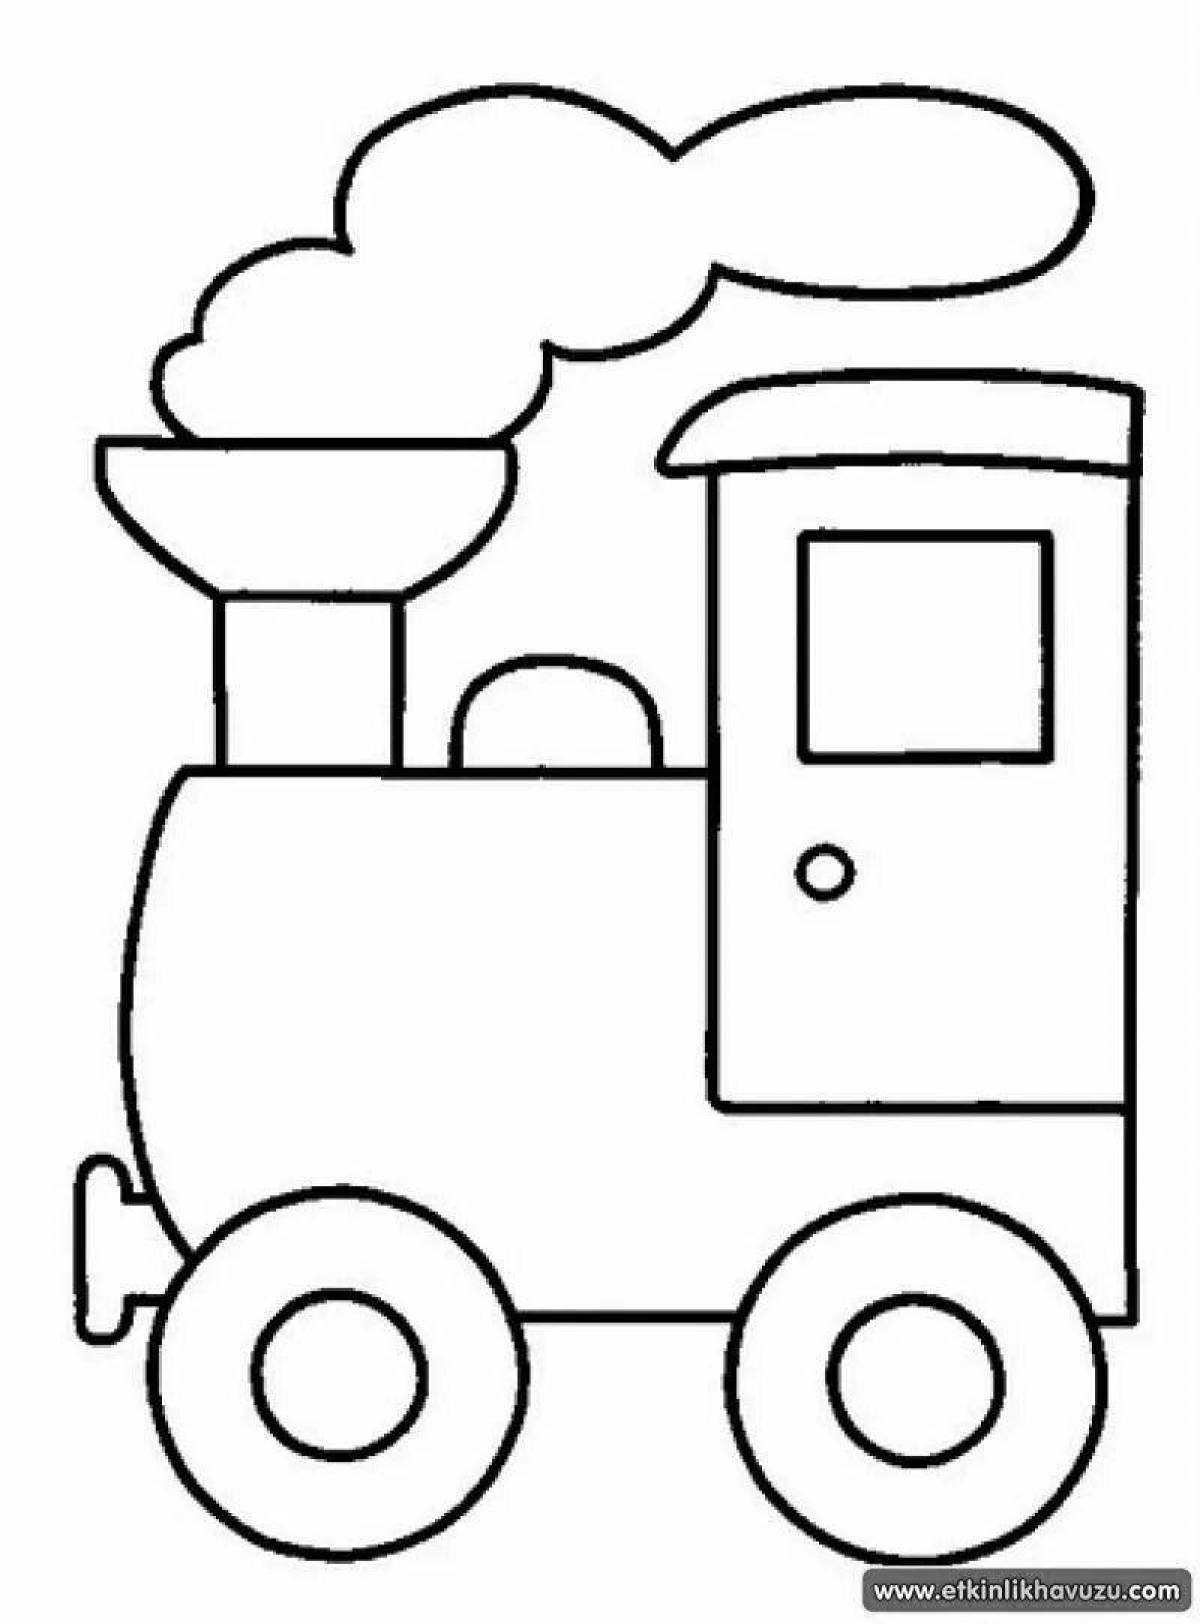 Wonderful locomotive coloring pages for kids